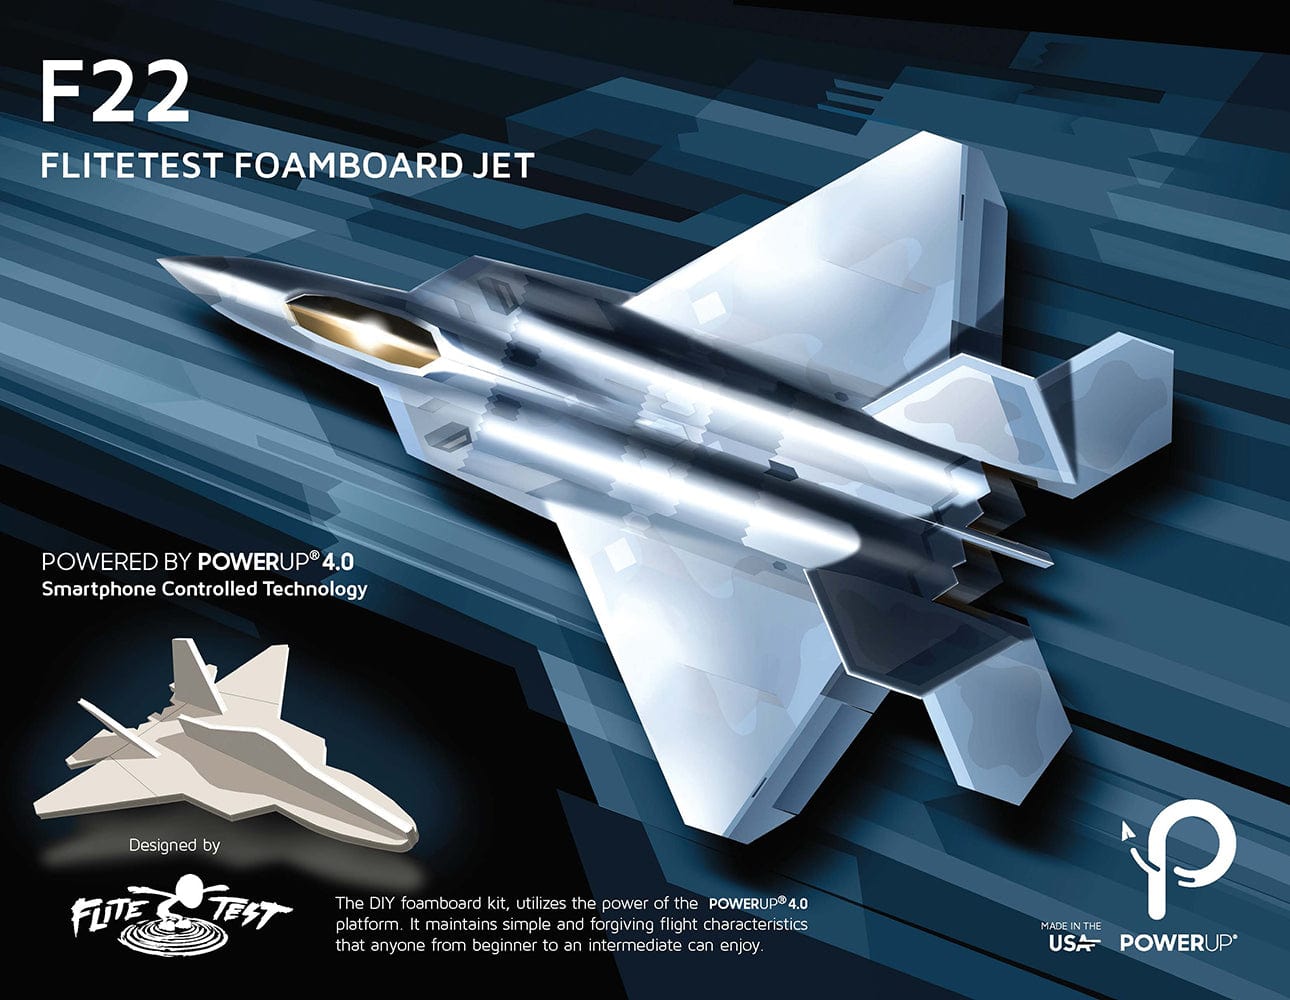 F22 RAPTOR® WITH POWERUP 4.0 AIRPLANE